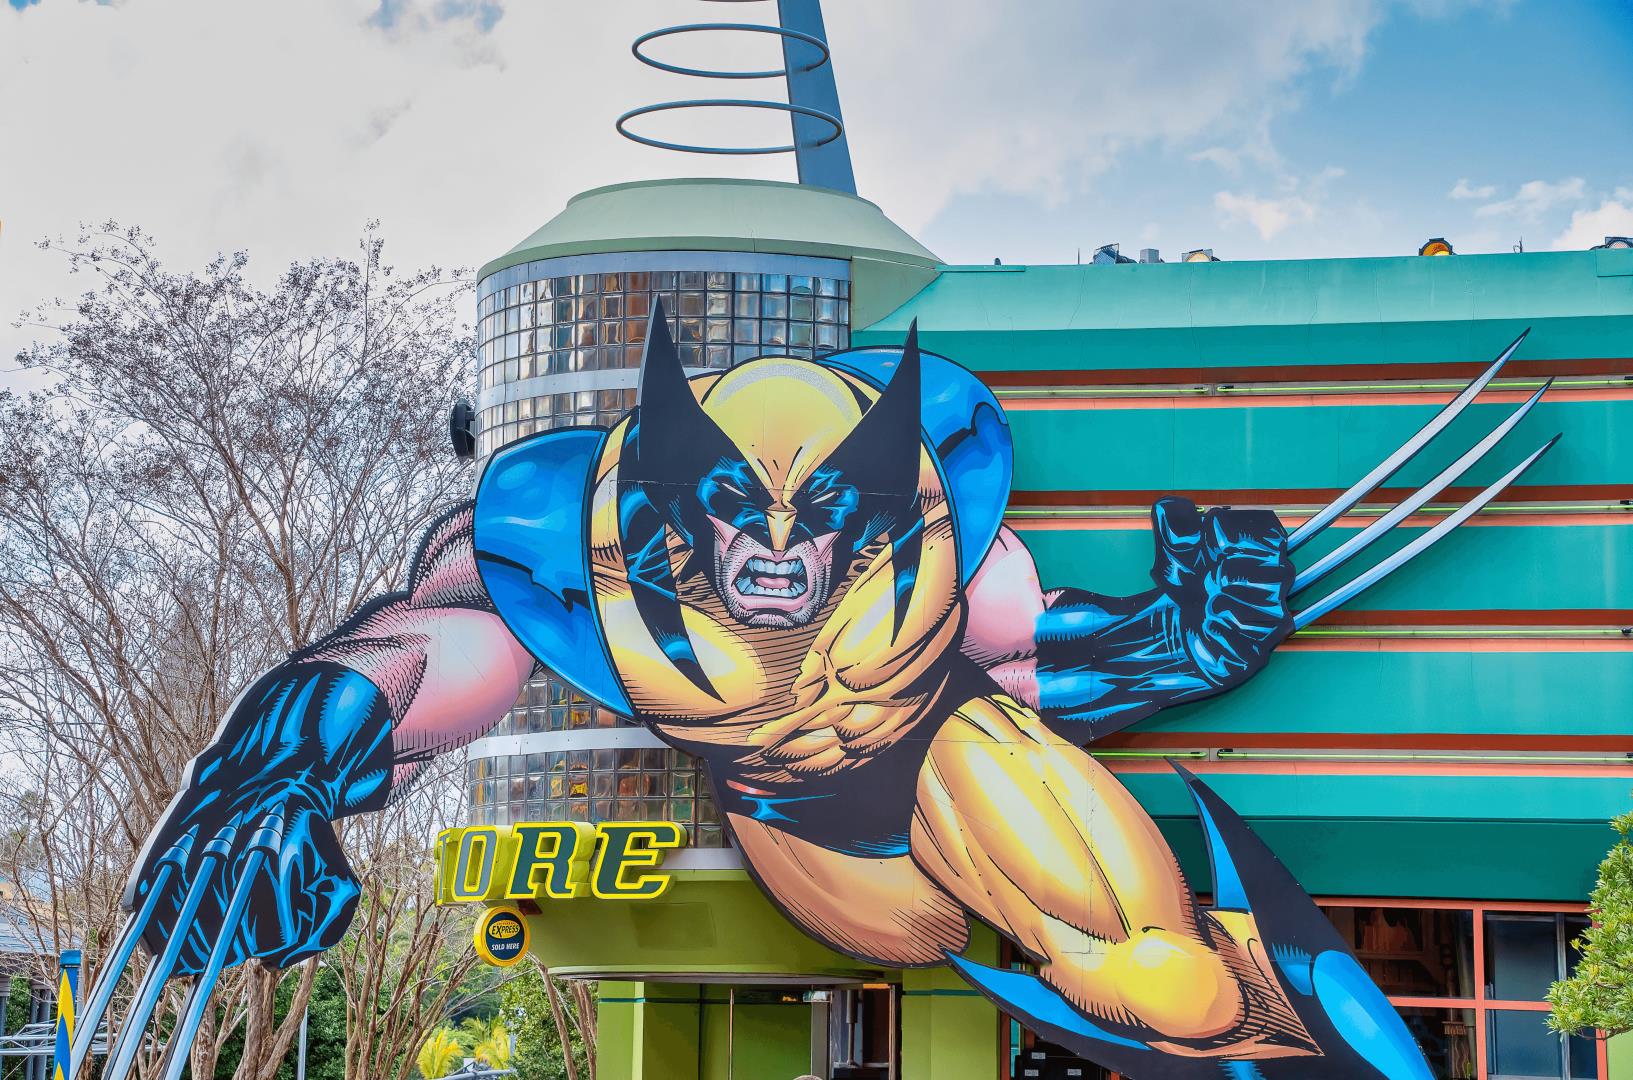 Building with a large superhero artwork on the side